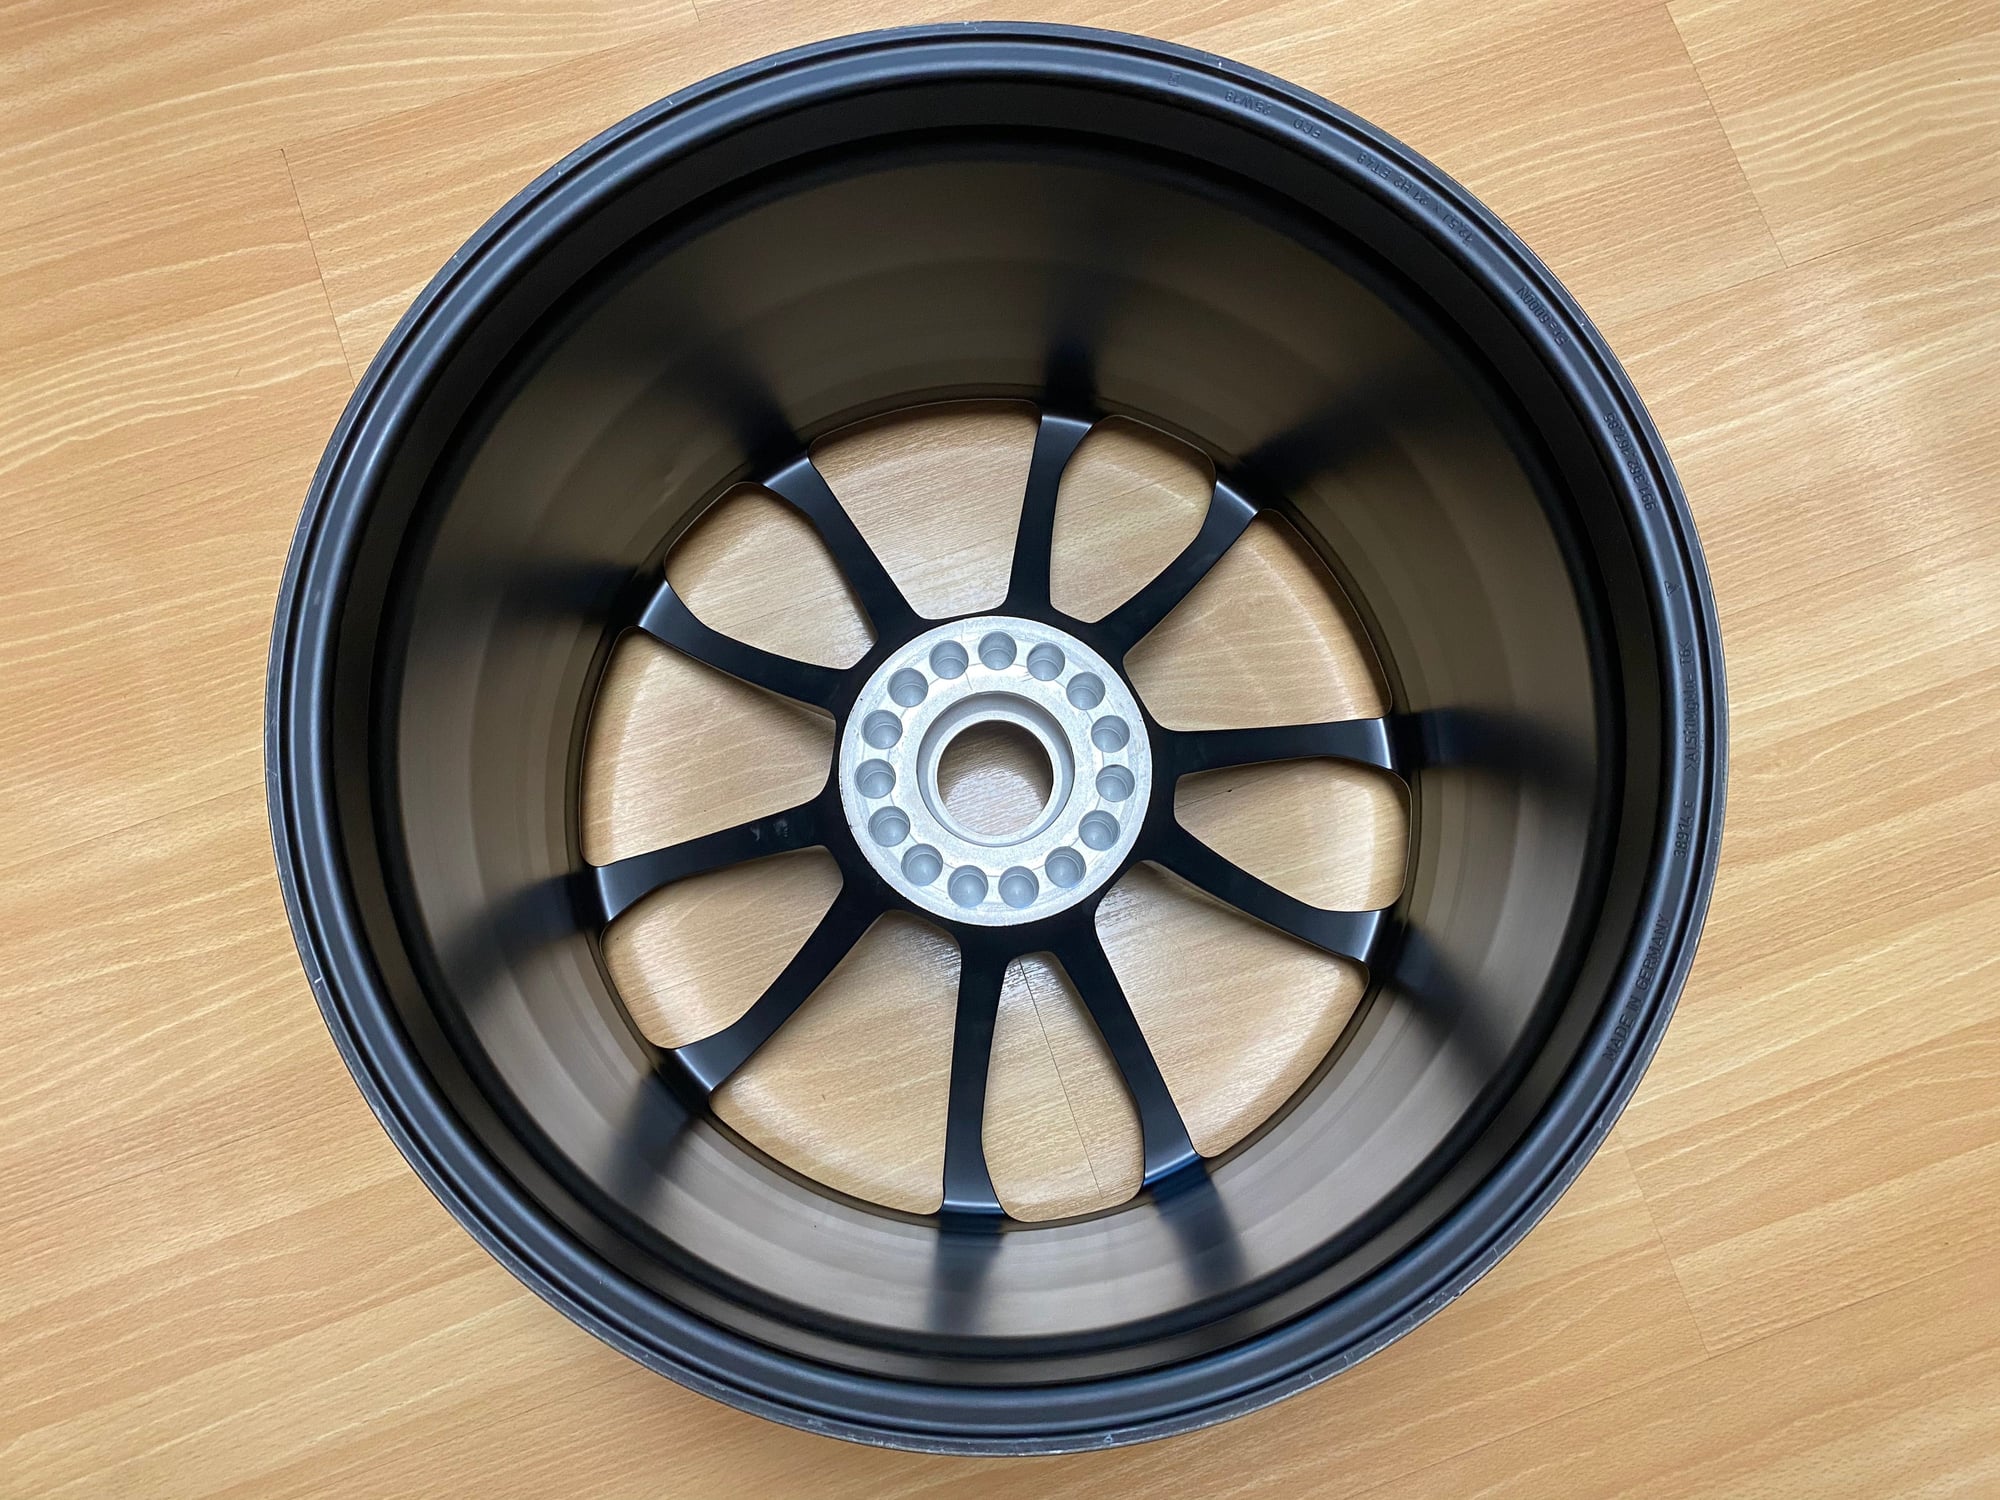 Wheels and Tires/Axles - Rear wheel for 991 GT3 RS - Used - 2016 to 2019 Porsche 911 - South San Francisco, CA 94080, United States